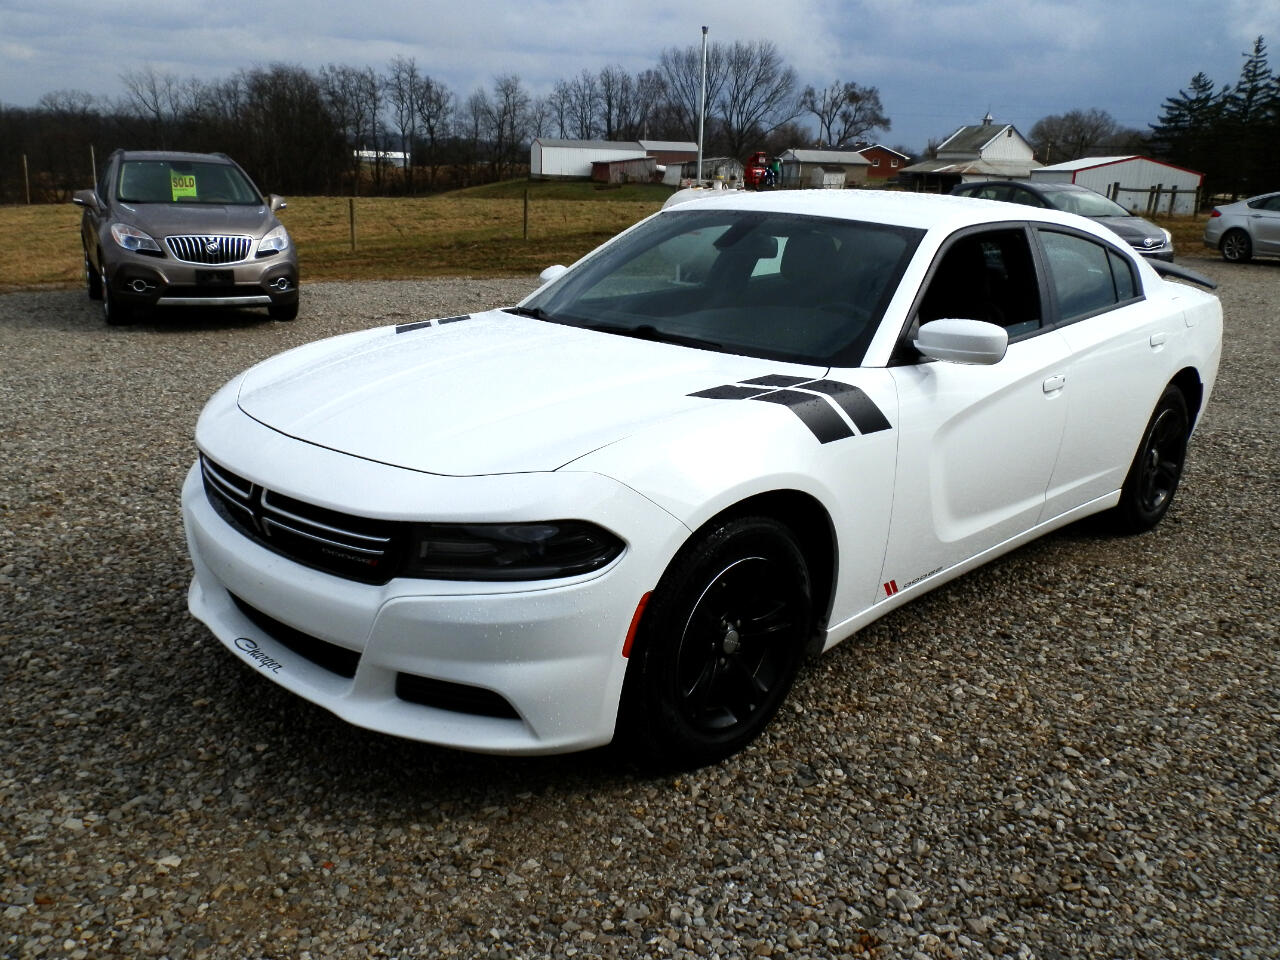 2015 Dodge Charger 4dr Sdn SE RWD